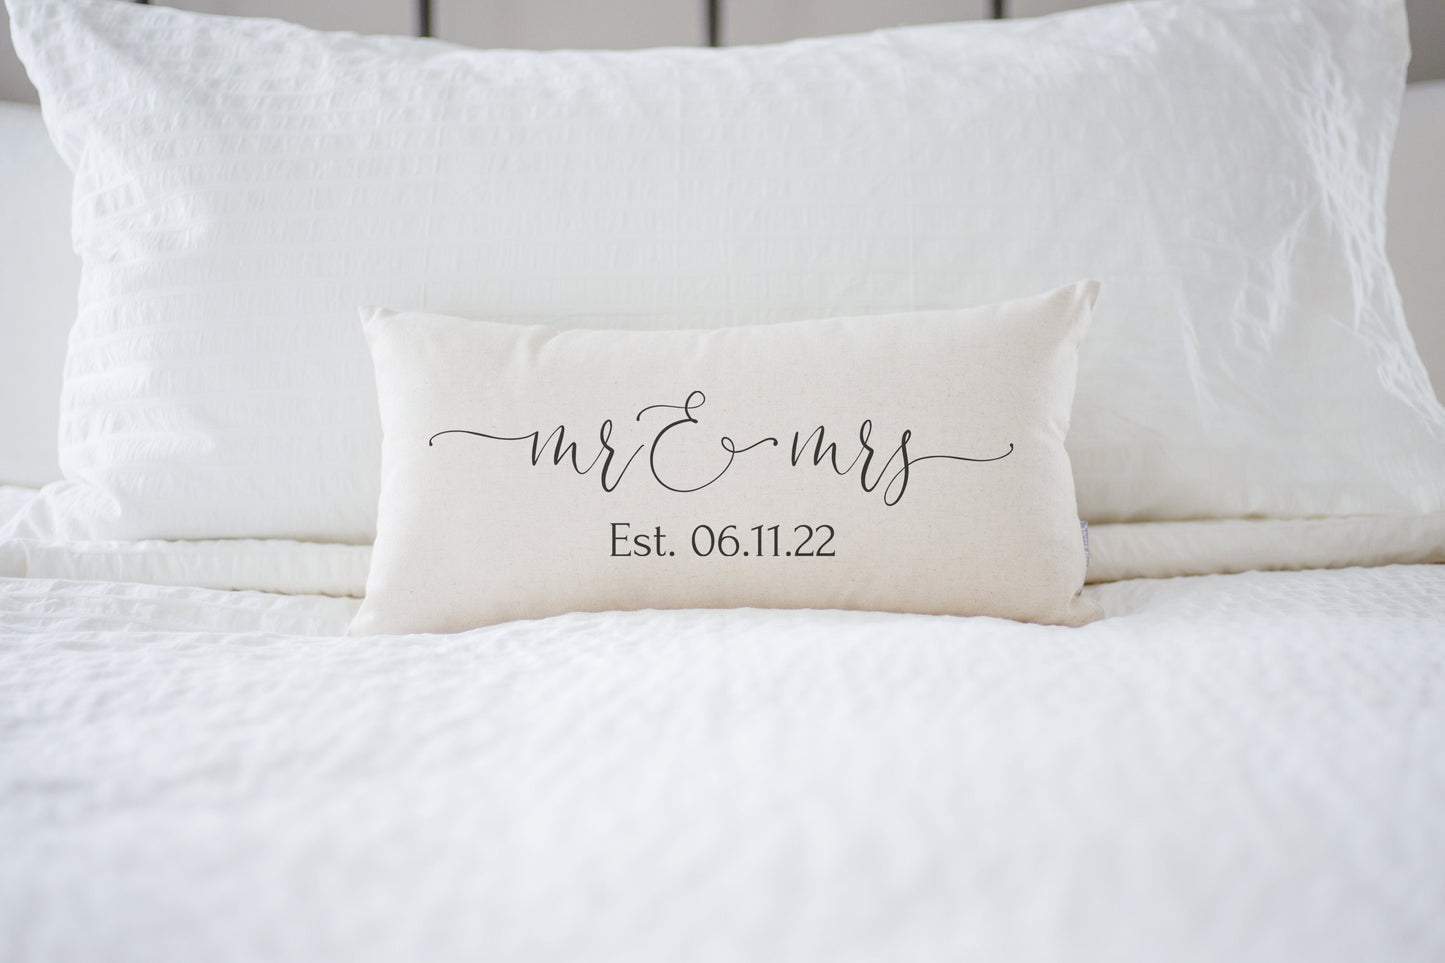 Wedding Gift Date Pillow | Personalized Date Pillow | Newlywed Gift | Engagement Gift | Rustic Wedding Gift | Linen Pillow Gift for Couple